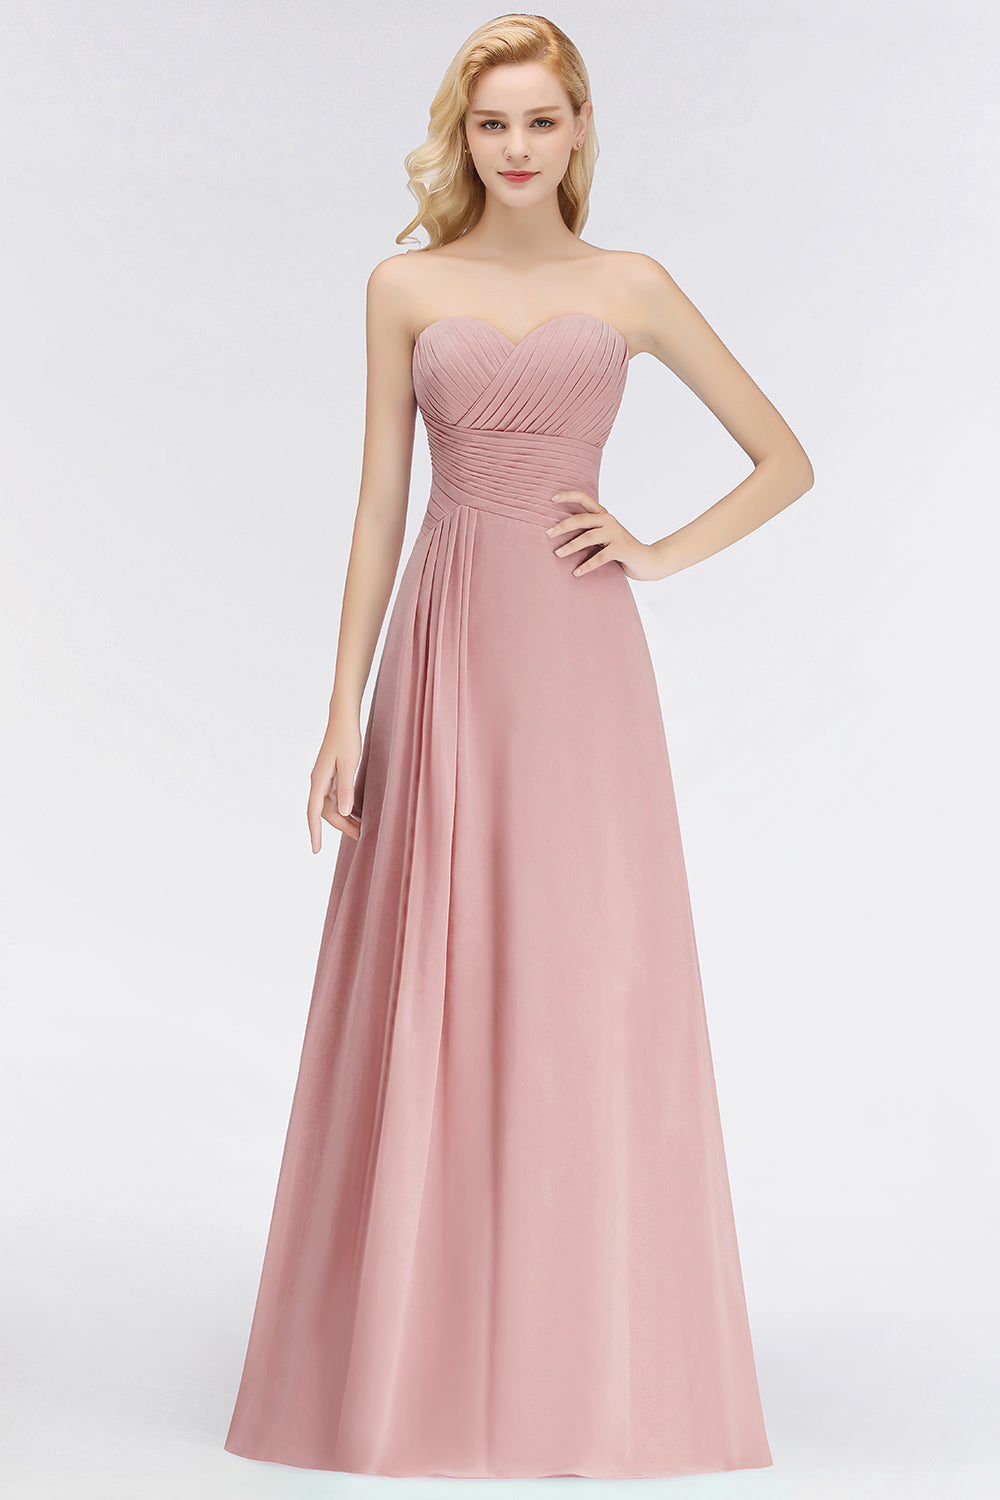 Gorgeous Sweetheart Ruched Long Bridesmaid Dress Dusty Rose Chiffon Strapless Maid of Honor Dress